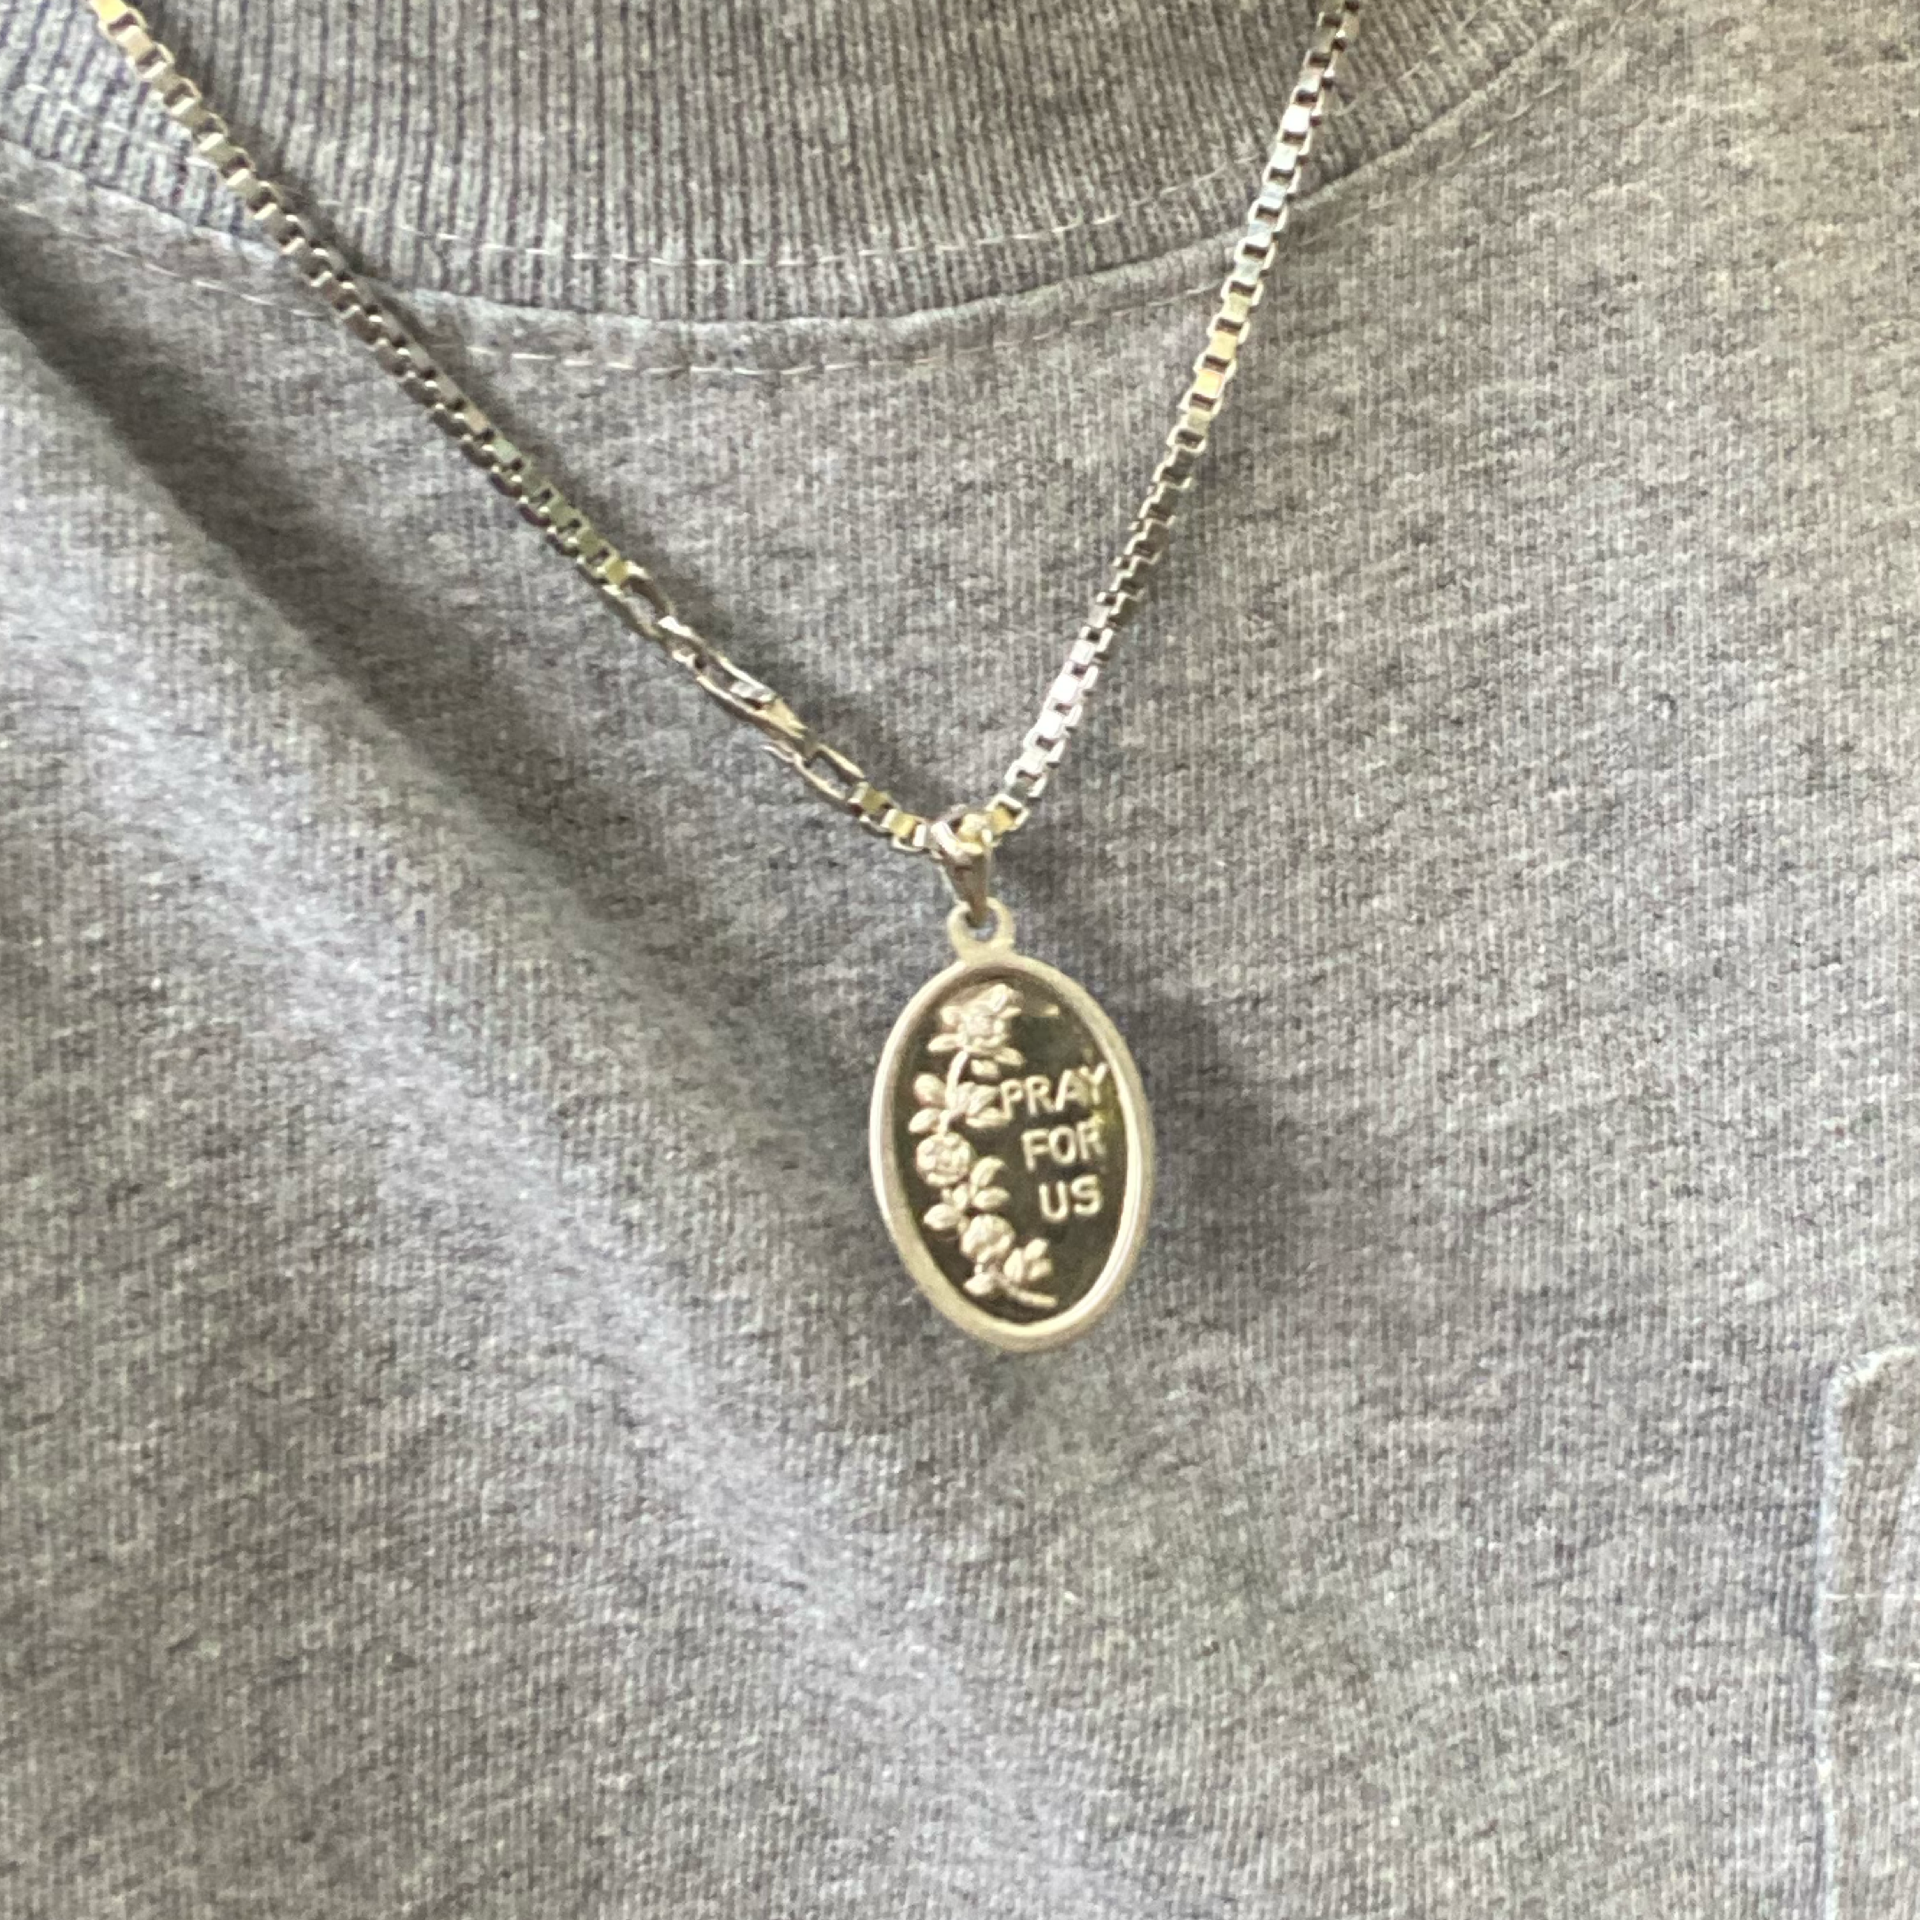 pray for us pendant + necklace